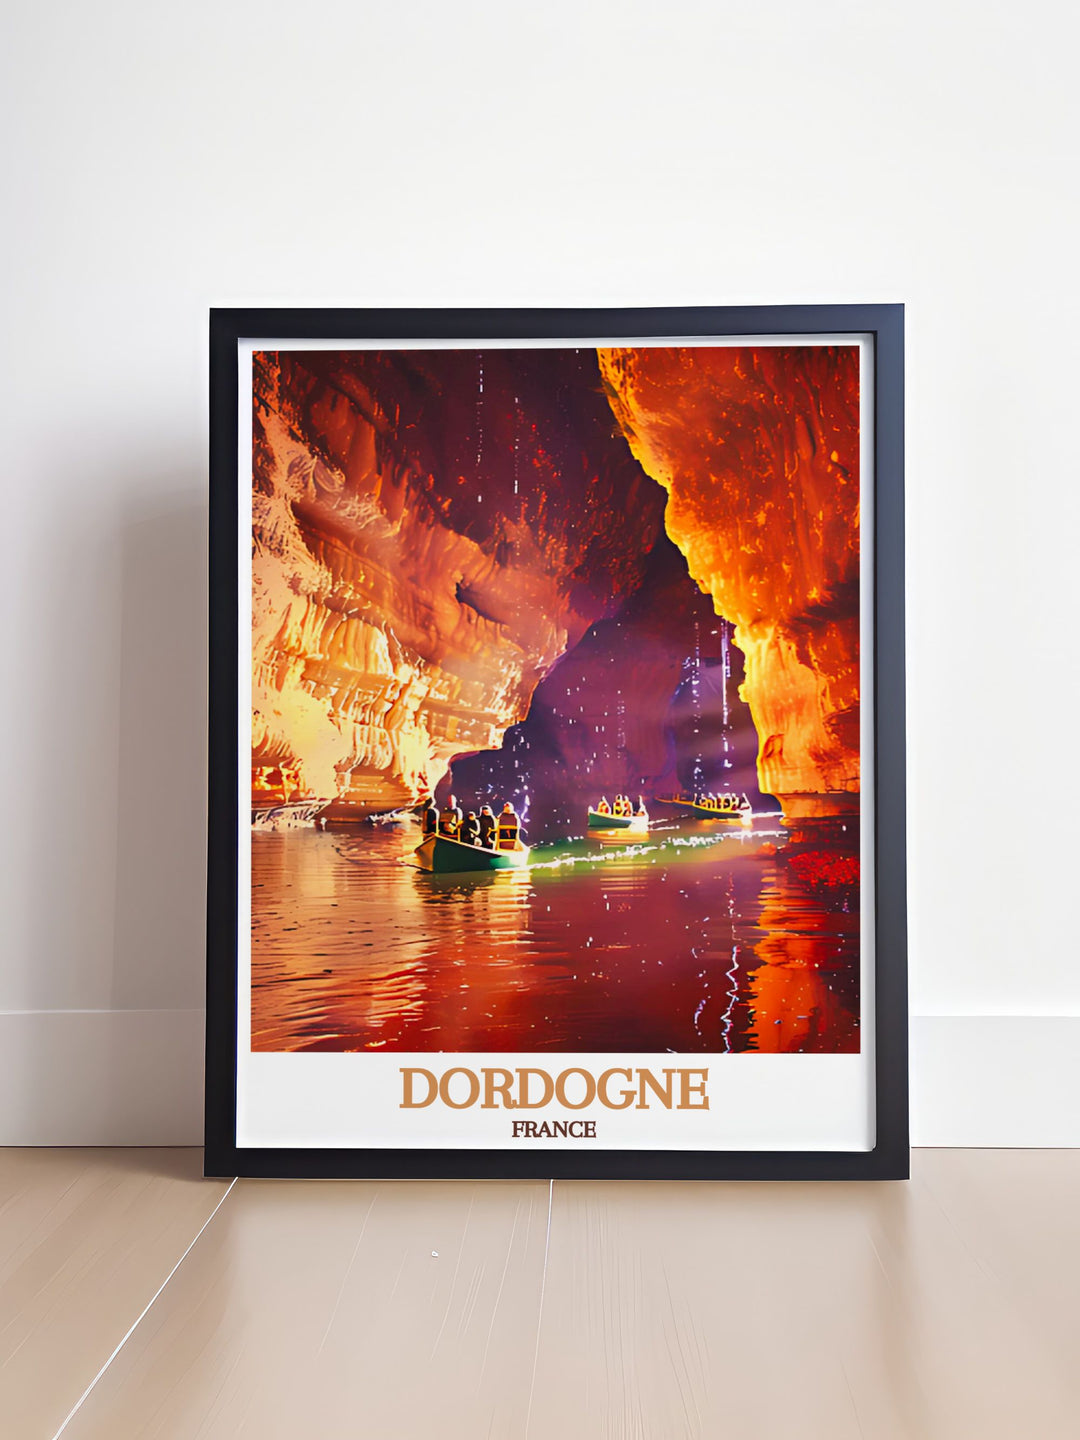 Featuring Gouffre de Padirac, this art print highlights the natural wonders intricate limestone formations and underground river, making it an ideal piece for nature lovers and adventurers.